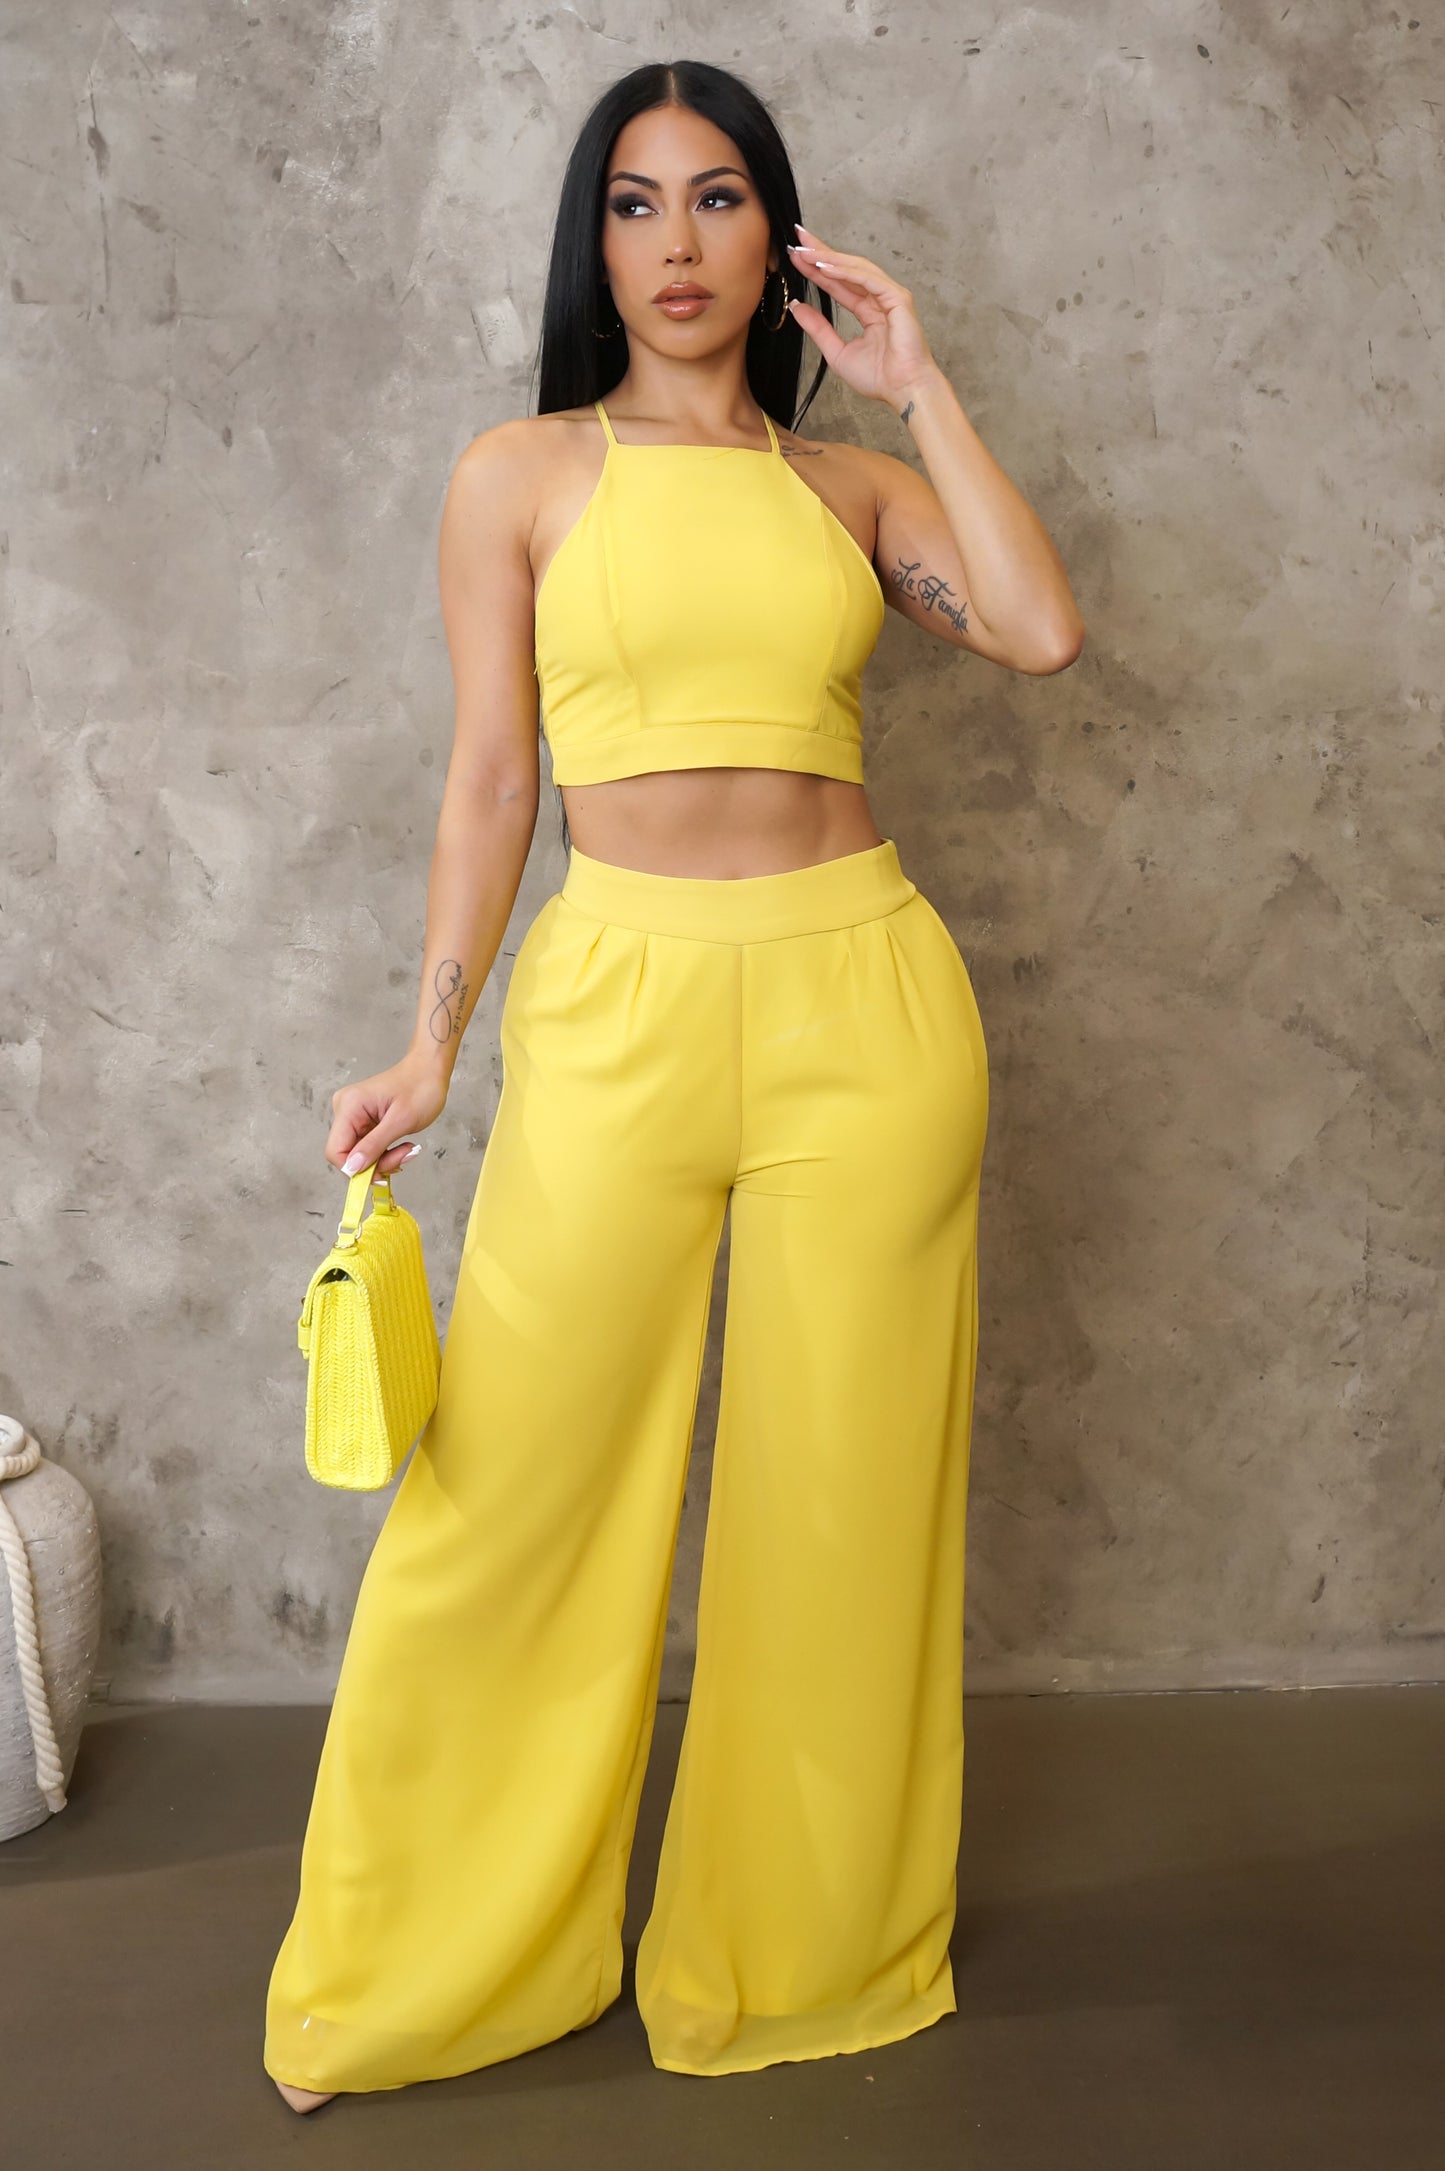 Going Out Tonight Pant Set - Yellow